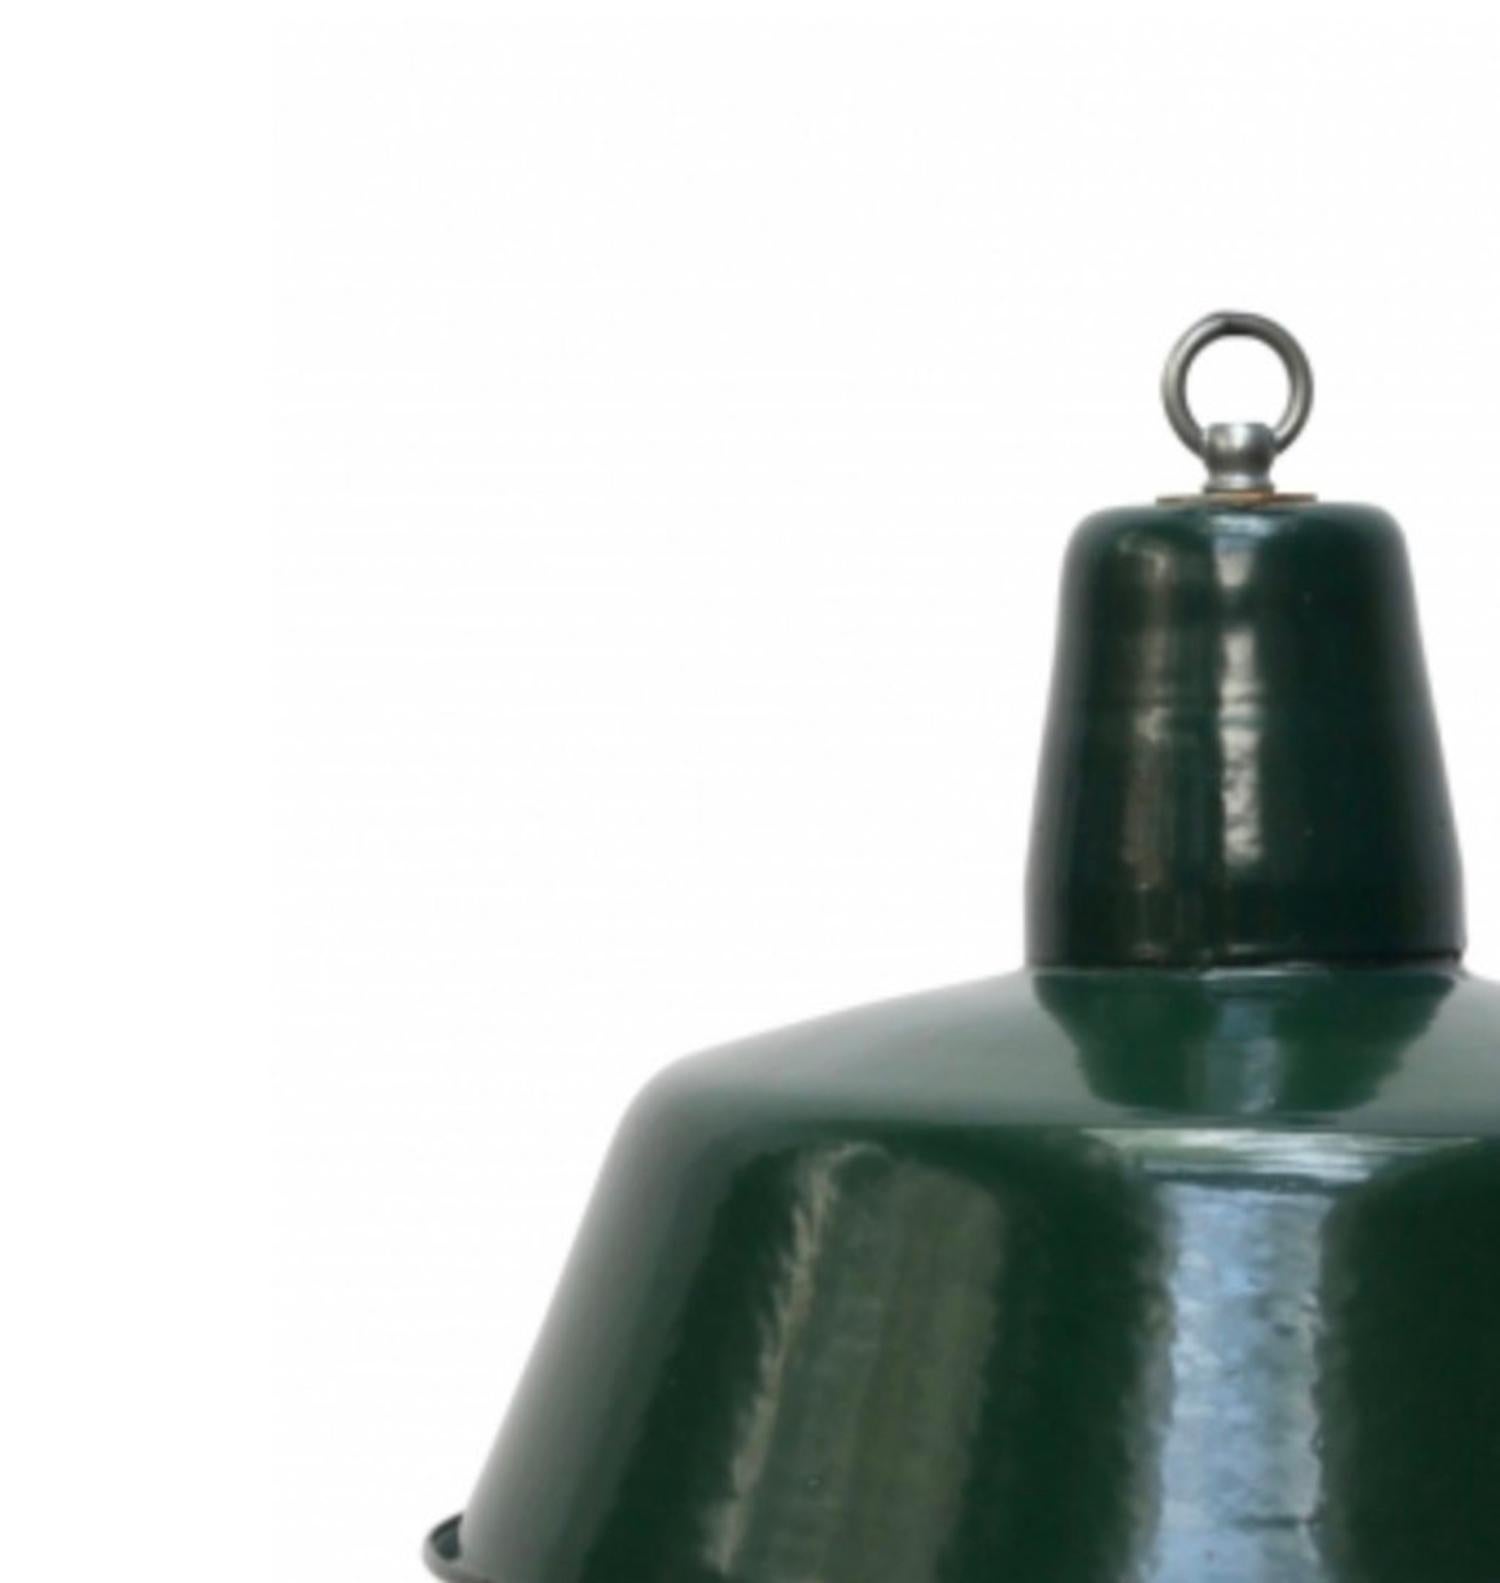 Vintage Industrial pendant. Green enamel with white interior.

Weight: 1.3 kg / 2.9 lb

All lamps have been made suitable by international standards for incandescent light bulbs, energy-efficient and LED bulbs. E26/E27 bulb holders and new wiring